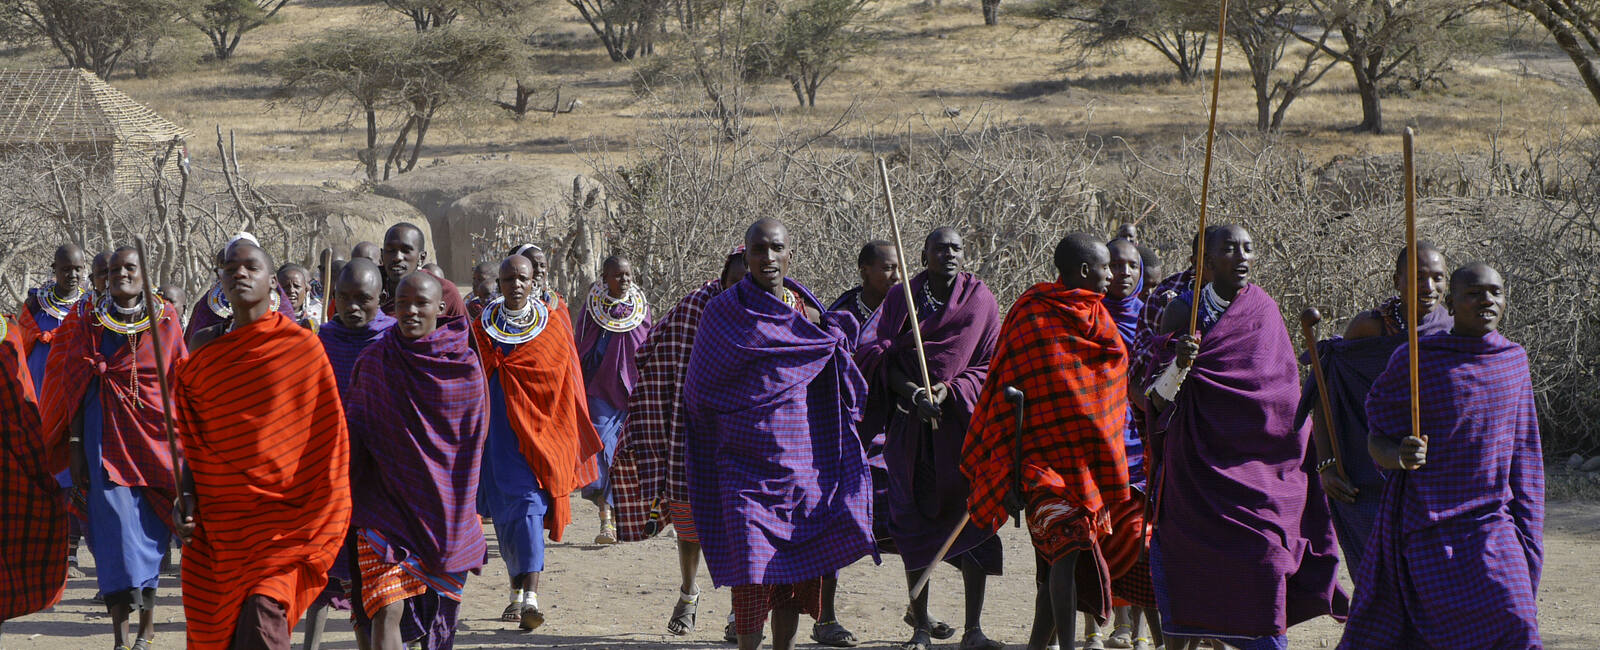 Culture at Ngorongoro Conservation Area